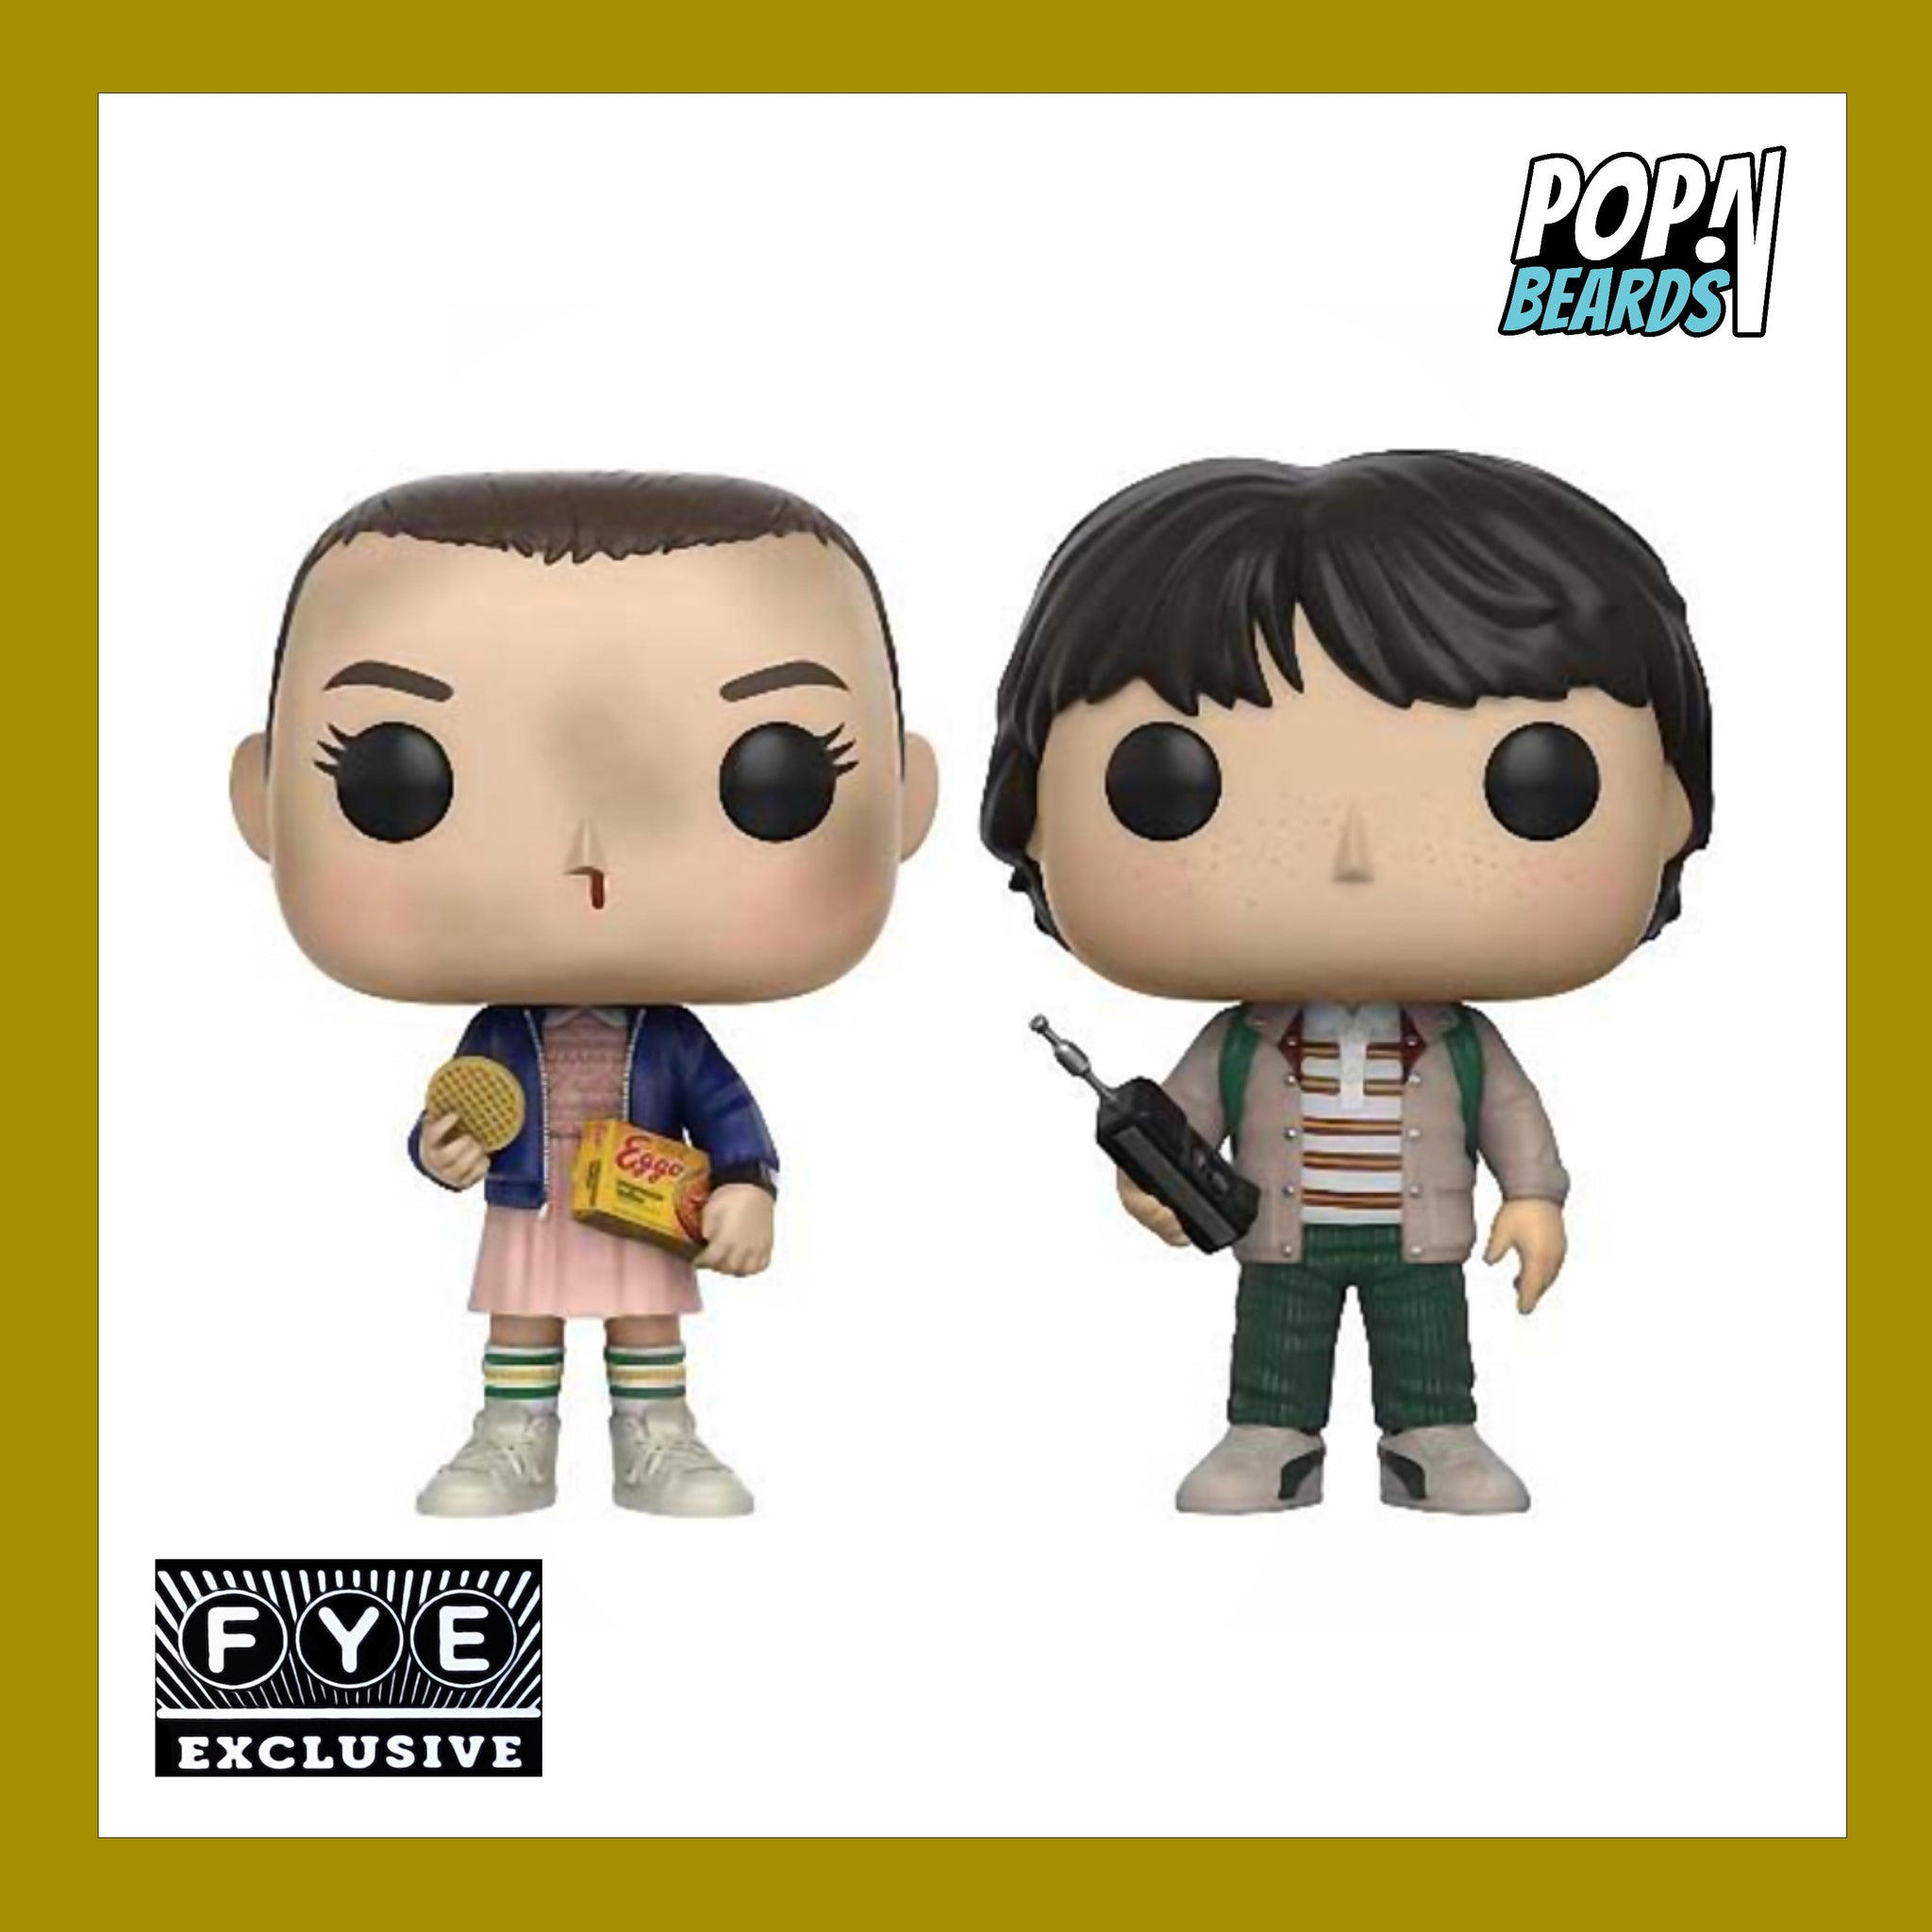 Funko POP! TV Stranger Things Eleven with Eggos 